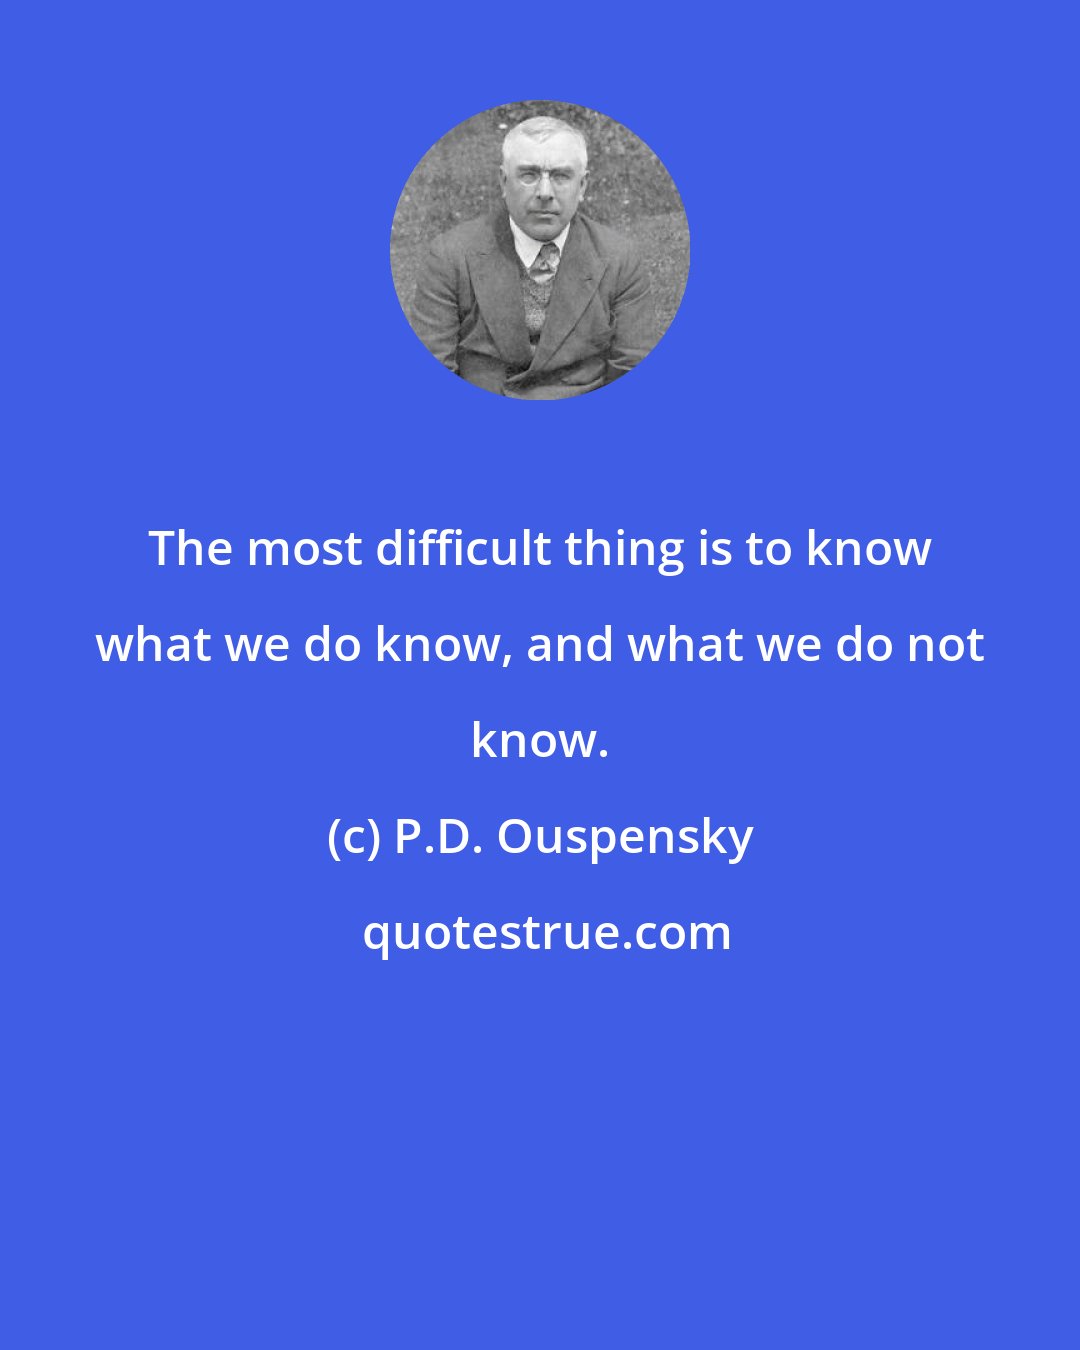 P.D. Ouspensky: The most difficult thing is to know what we do know, and what we do not know.